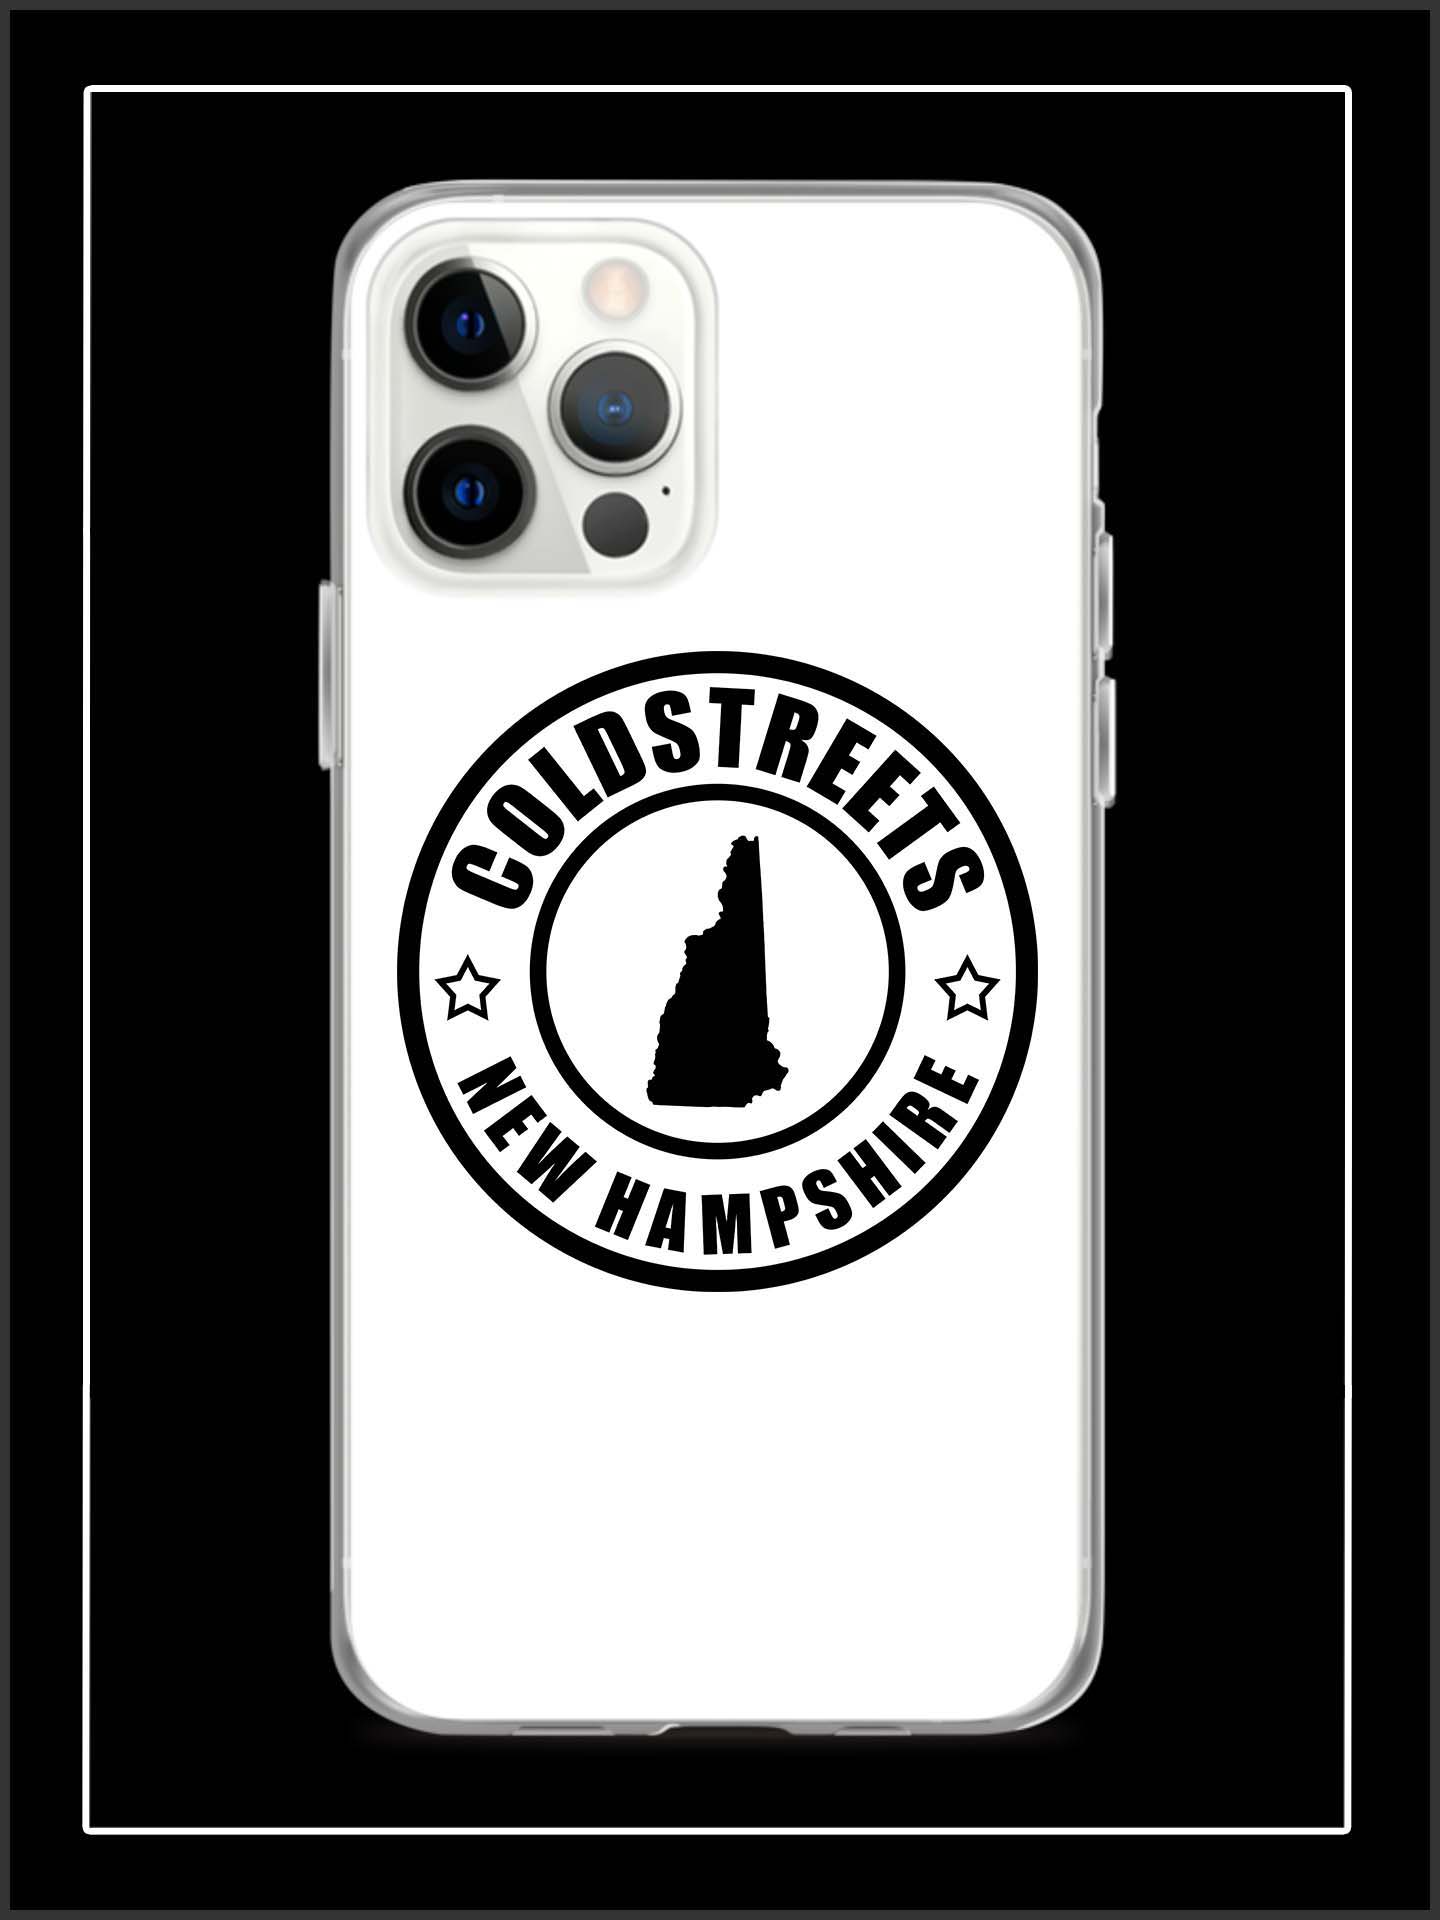 Cold Streets New Hampshire iPhone Cases